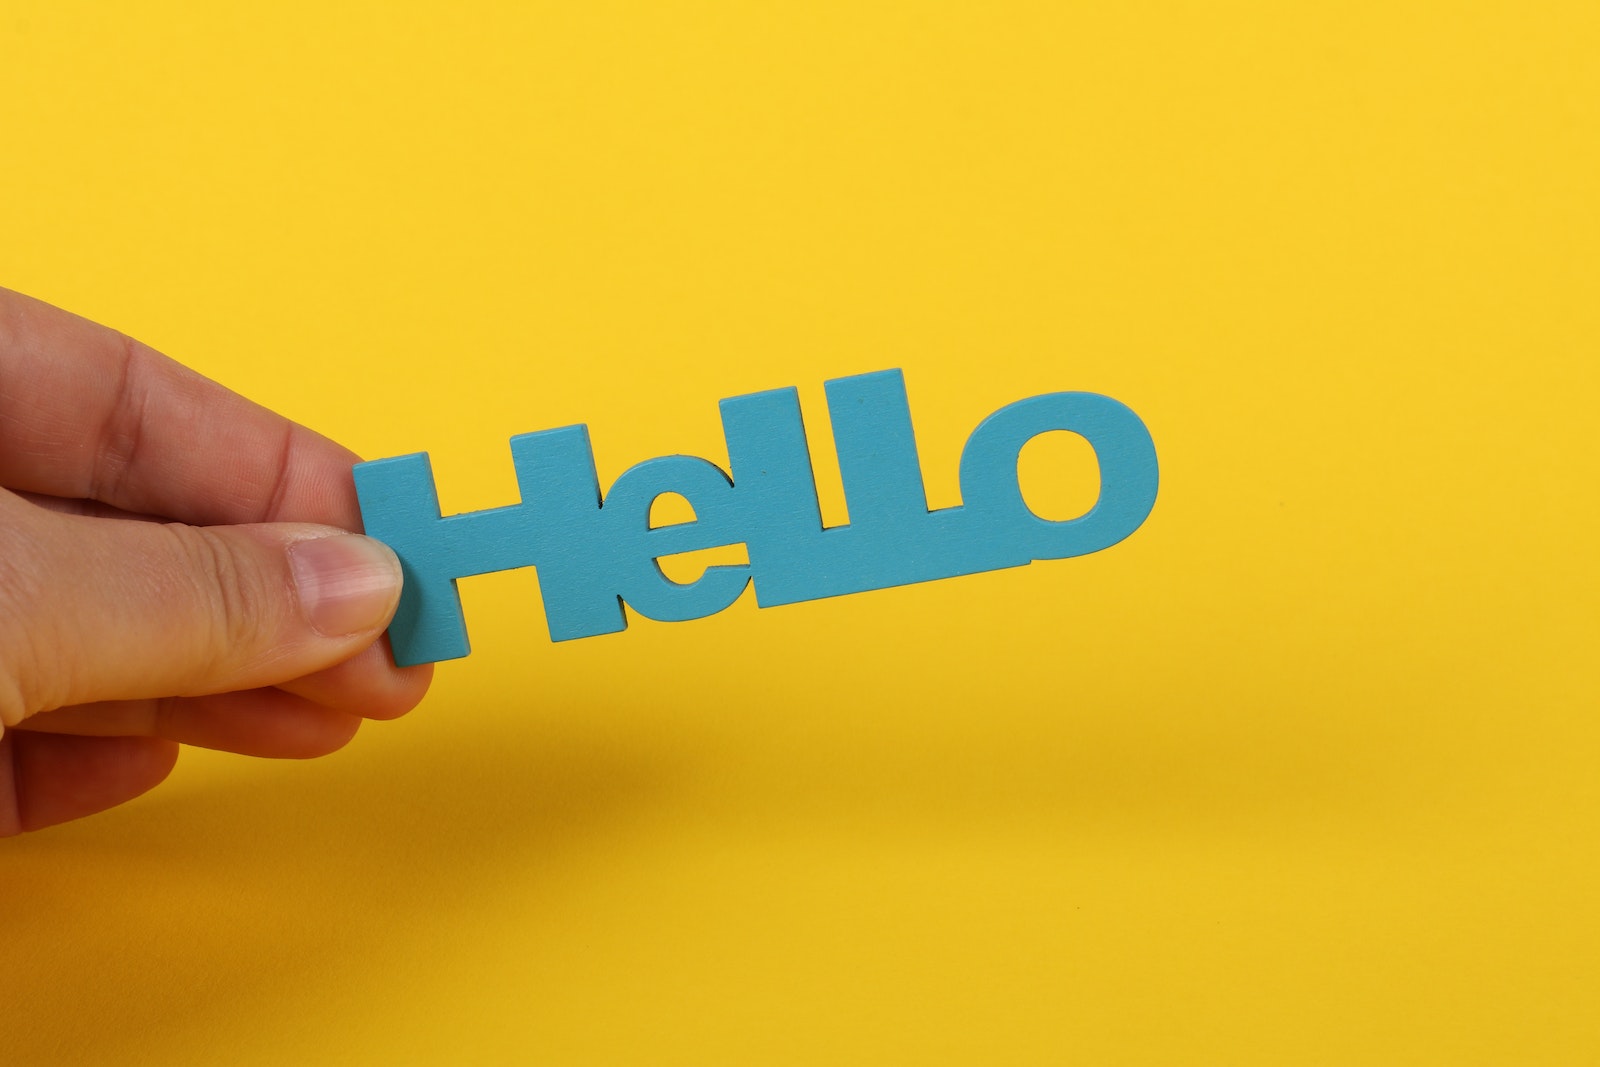 Close-Up Photo of a Person Holding a Hello Text on Yellow Background